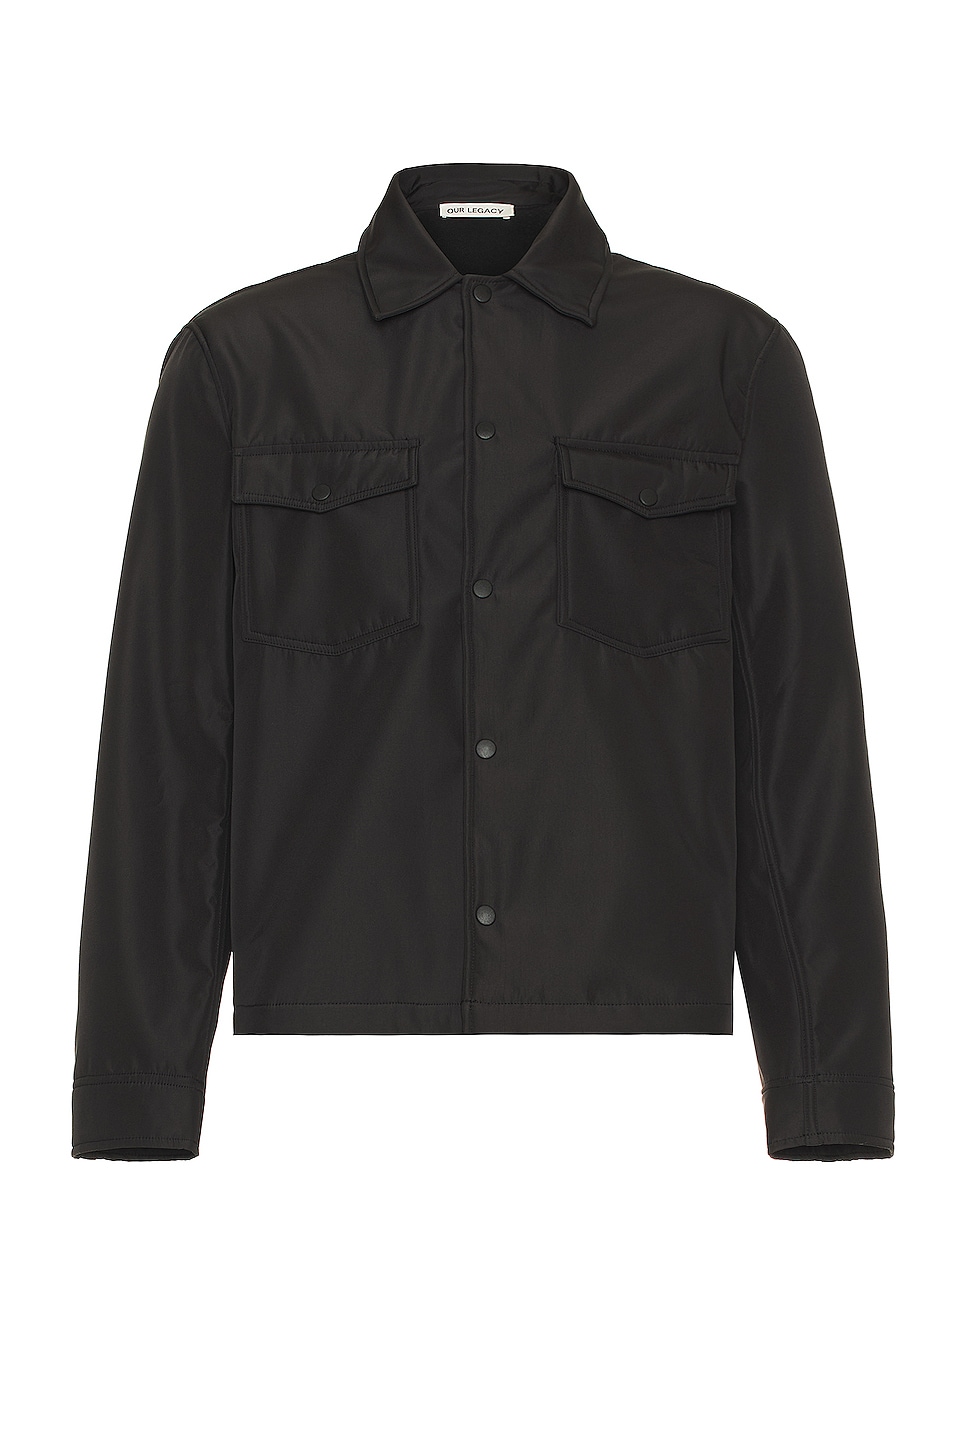 Image 1 of Our Legacy Evening Coach Jacket in Black Fleecy Tech